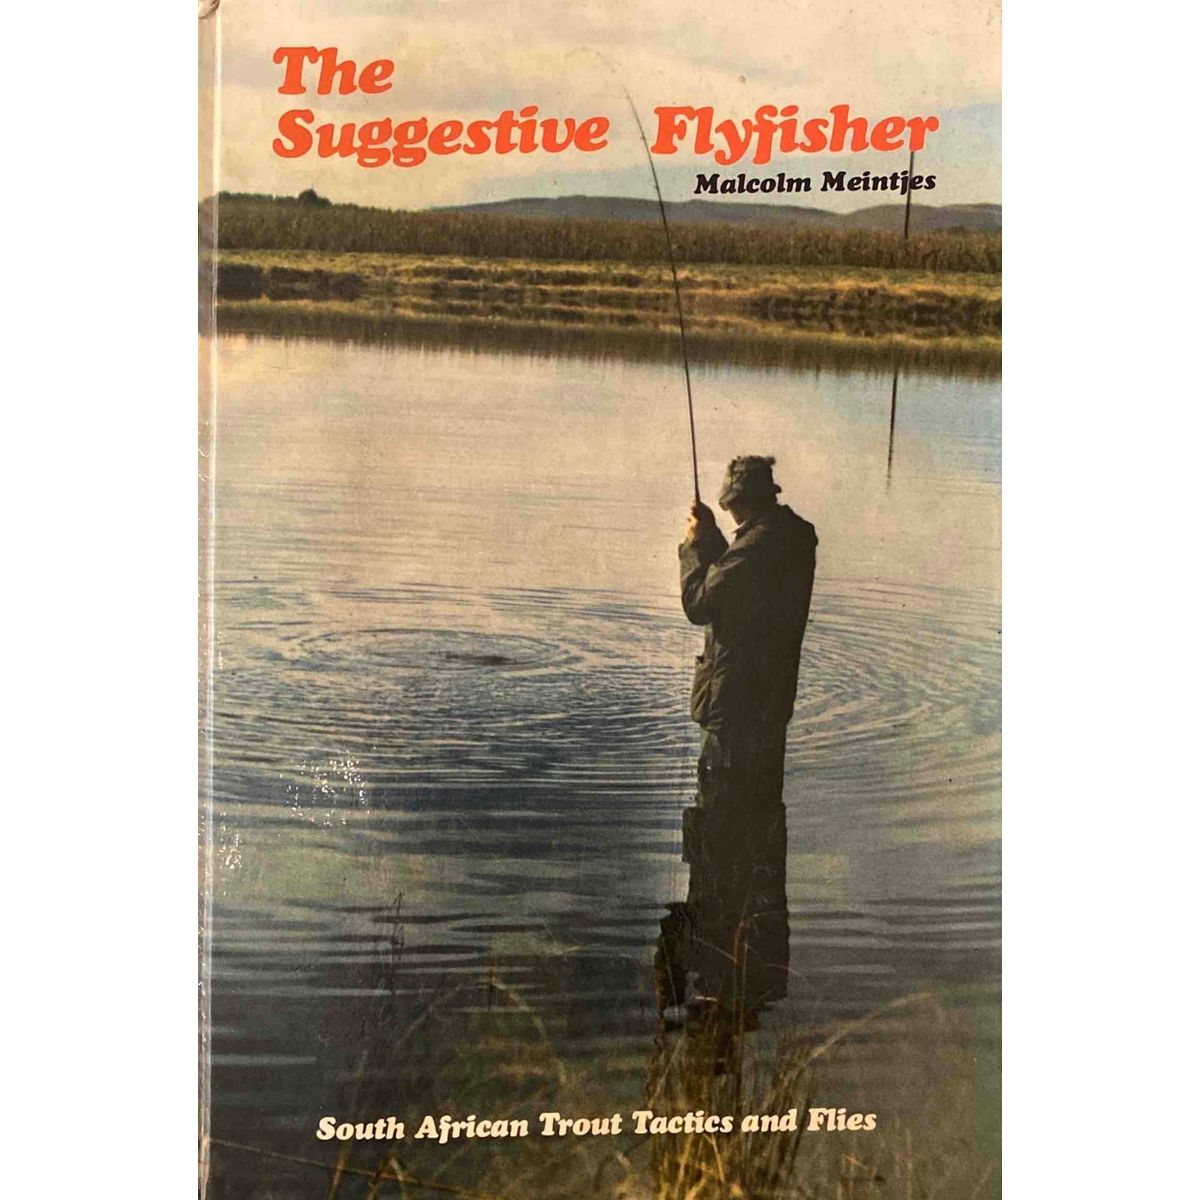 ISBN: 9780620118552 / 0620118555 - The Suggestive Flyfisher by Malcolm Meintjies, 1st Edition [1987]